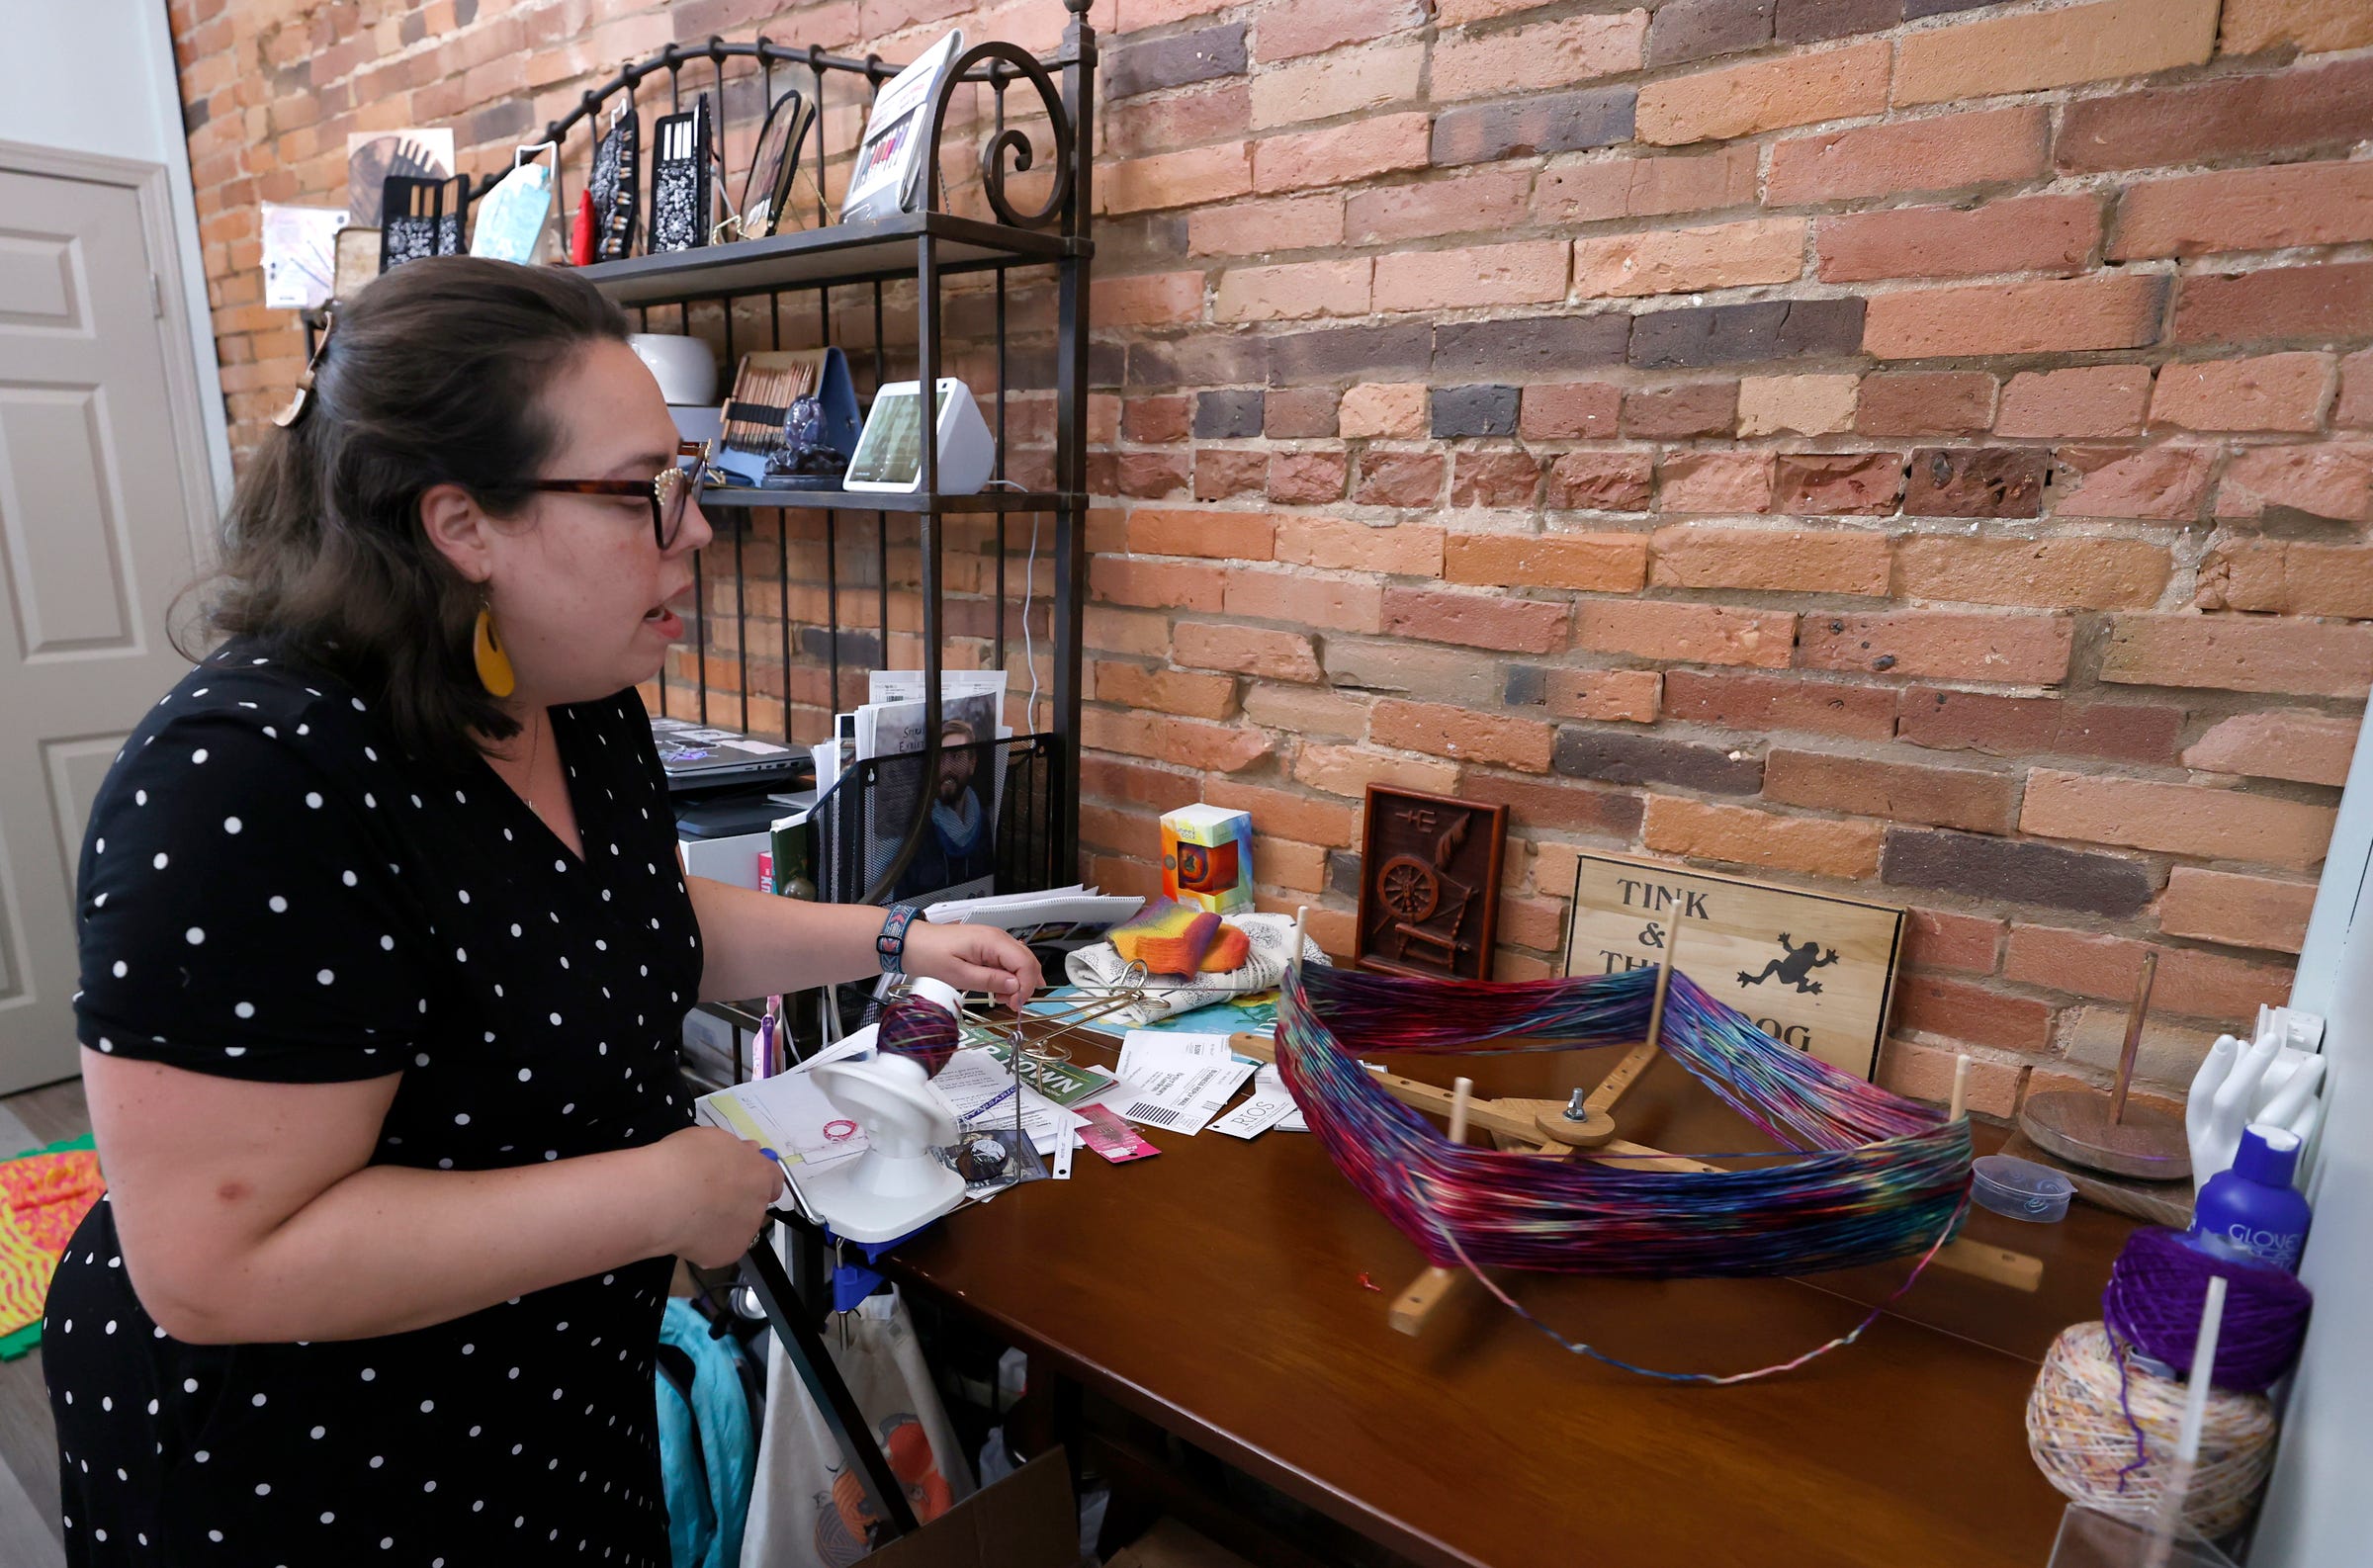 Michelle Beechler, owner of Tink & The Frog, works with getting yarn ready at her knitting store in Adrian on Sept. 1, 2022. Beechler taught at nearby Adrian College but left the school over disagreements with the school administration. She opened her popular store in March 2021.